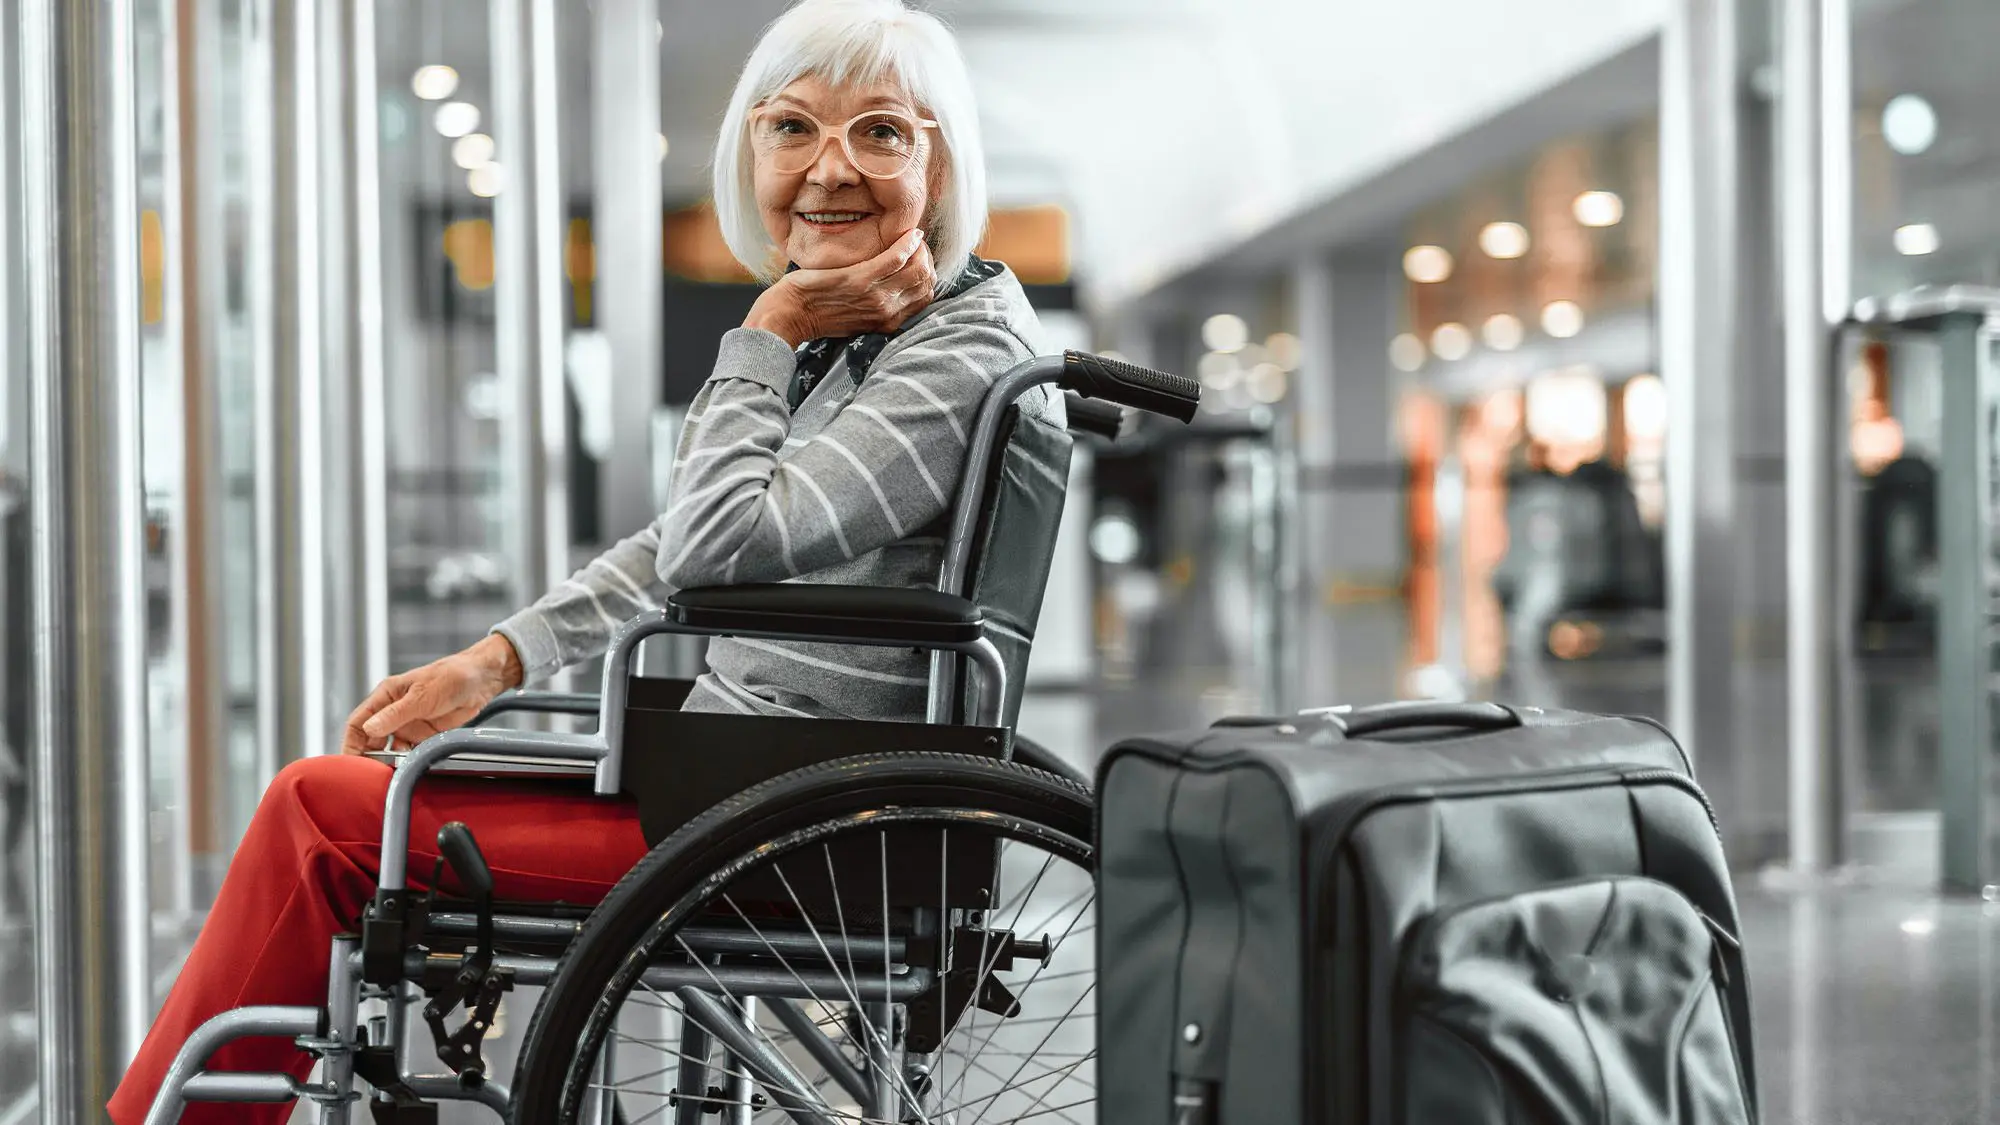 Woman in wheelchair with luggage in Nexus Airlines airport